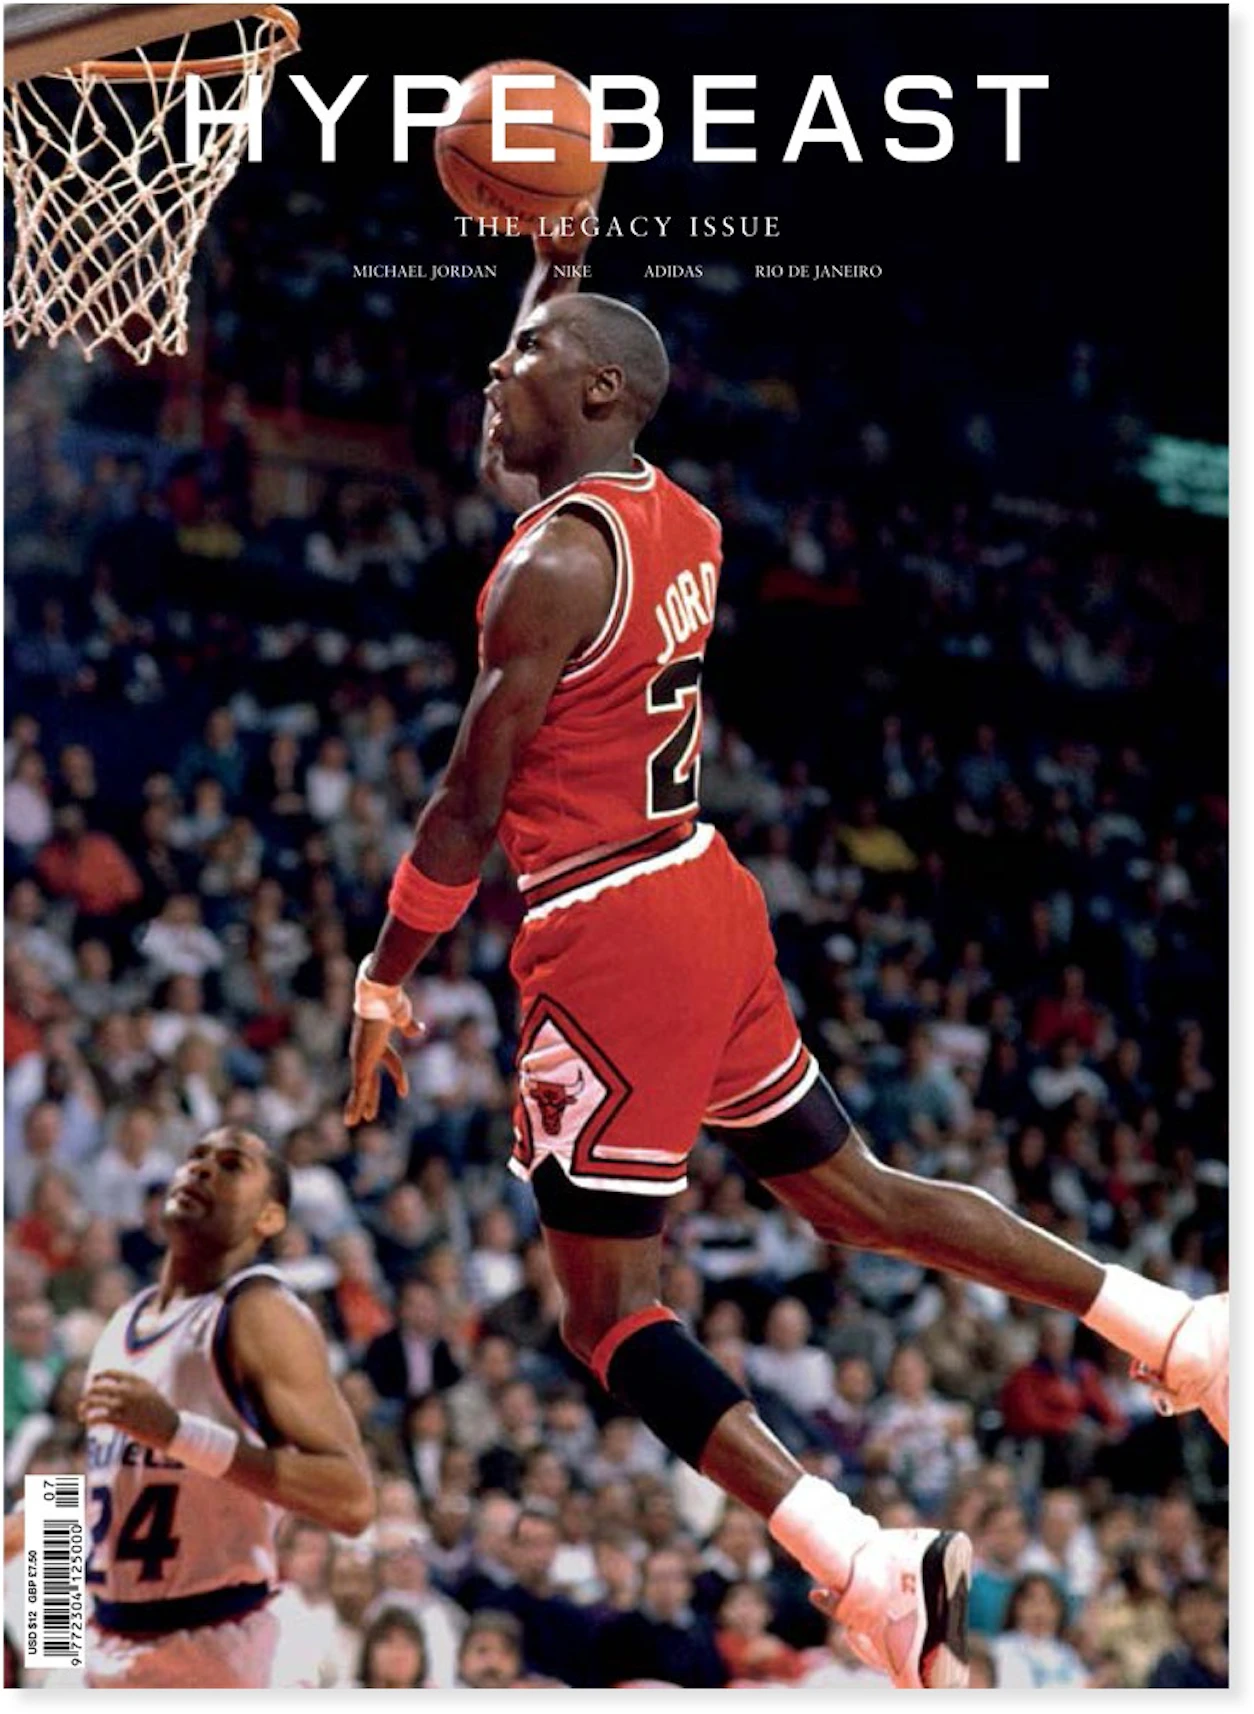 Hypebeast Magazine Issue 7: The Legacy Issue - Michael Jordan Cover Book  Multi - SS14 - US